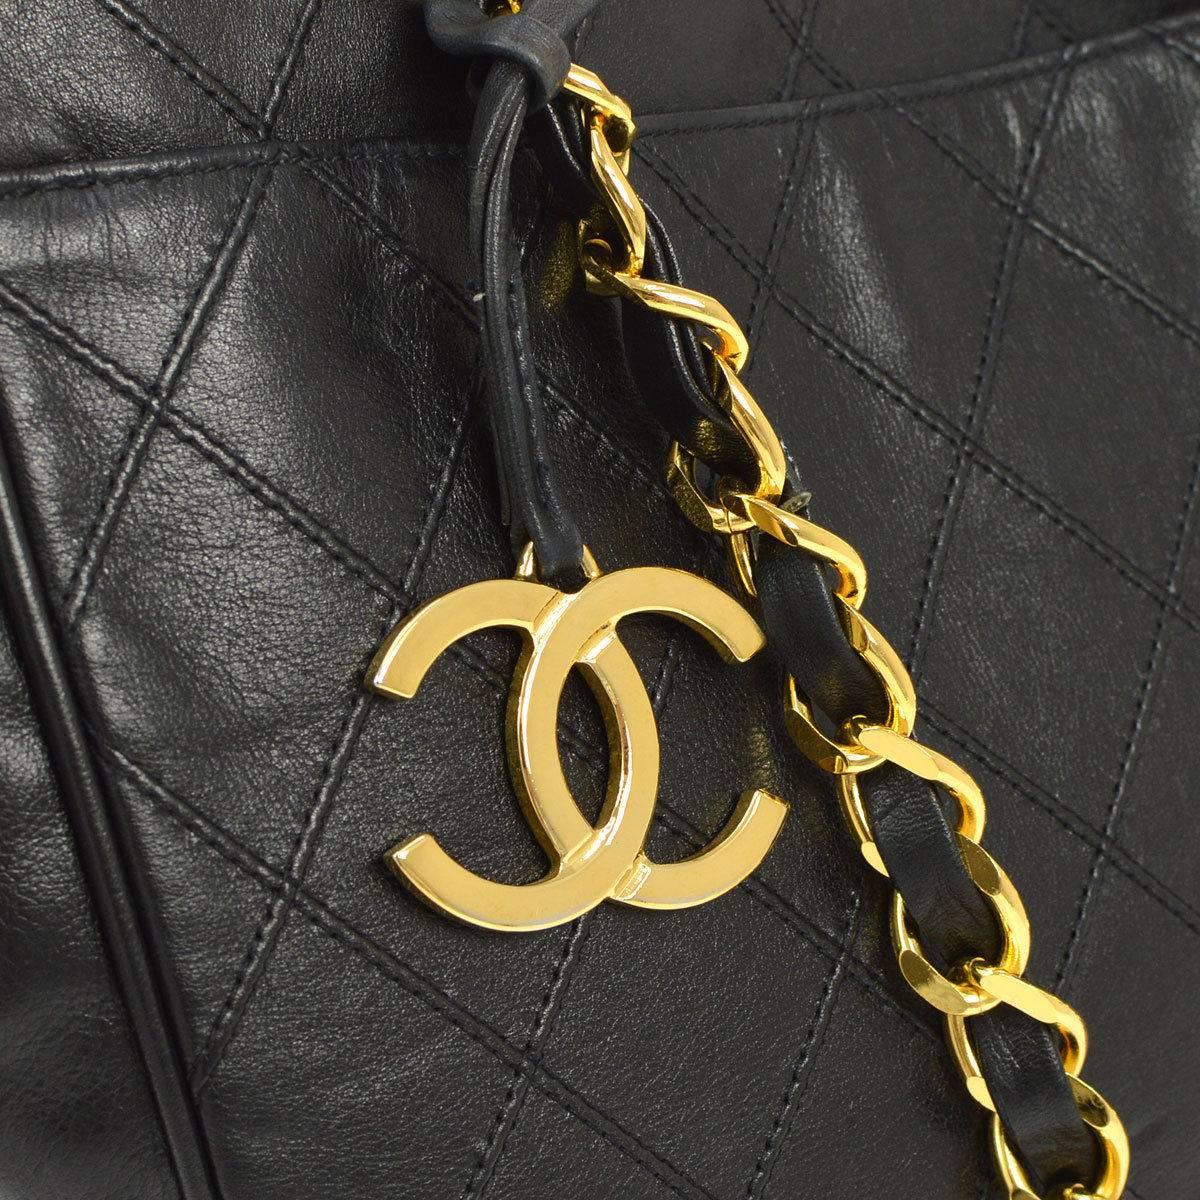 CURATOR'S NOTES

Chanel Vintage Black Leather Quilted Carryall Shopper Tote Shoulder Bag  

Leather
Gold tone hardware
Zipper closure
Leather lining
Made in Italy
Date code 0828289
Shoulder strap drop 8"
Measures 11.5" W x 12" H x